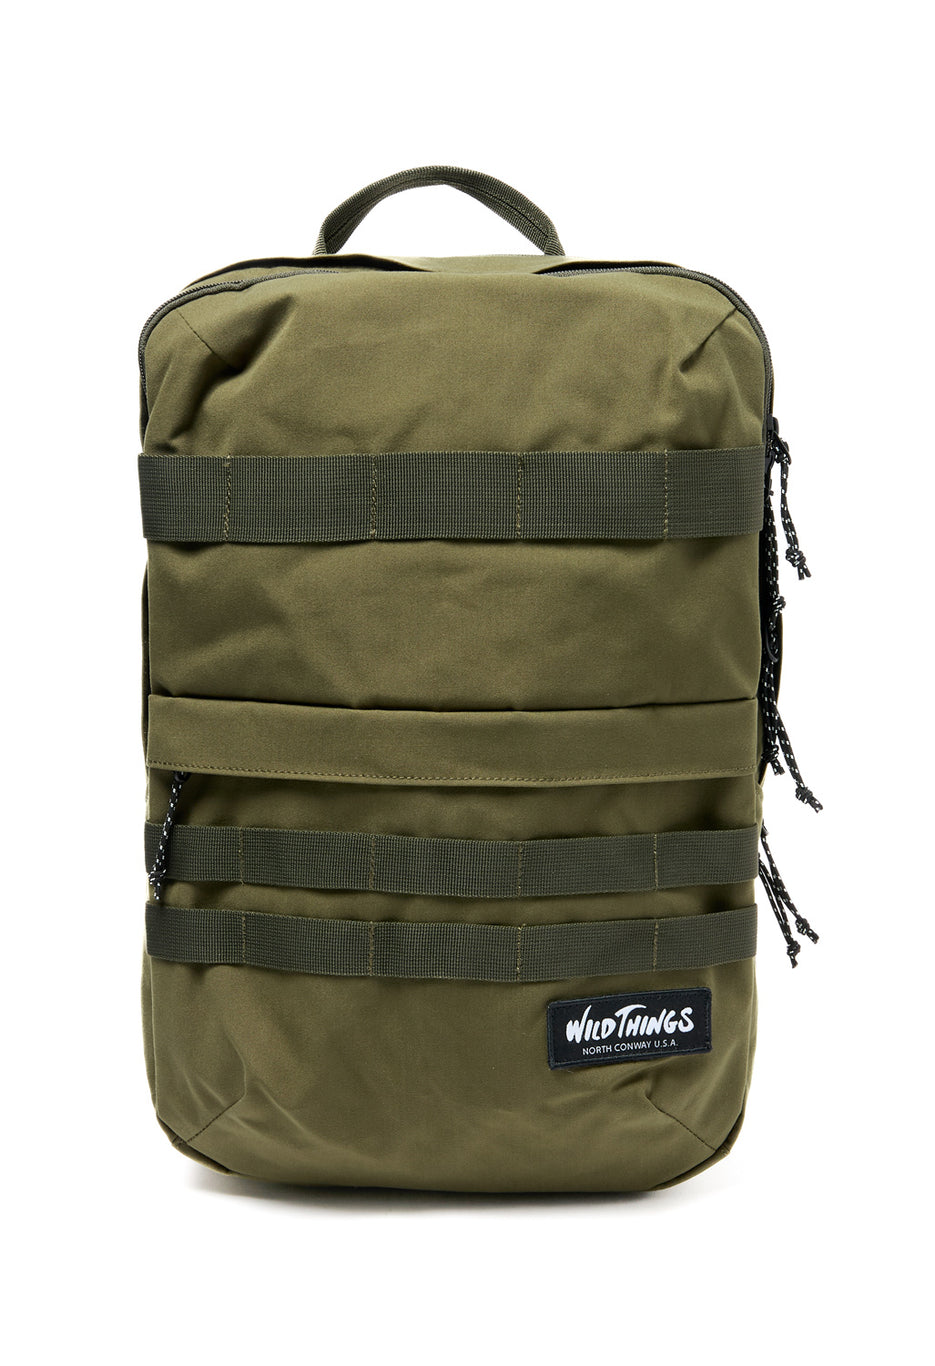 Wild Things Military Daypack - Olive